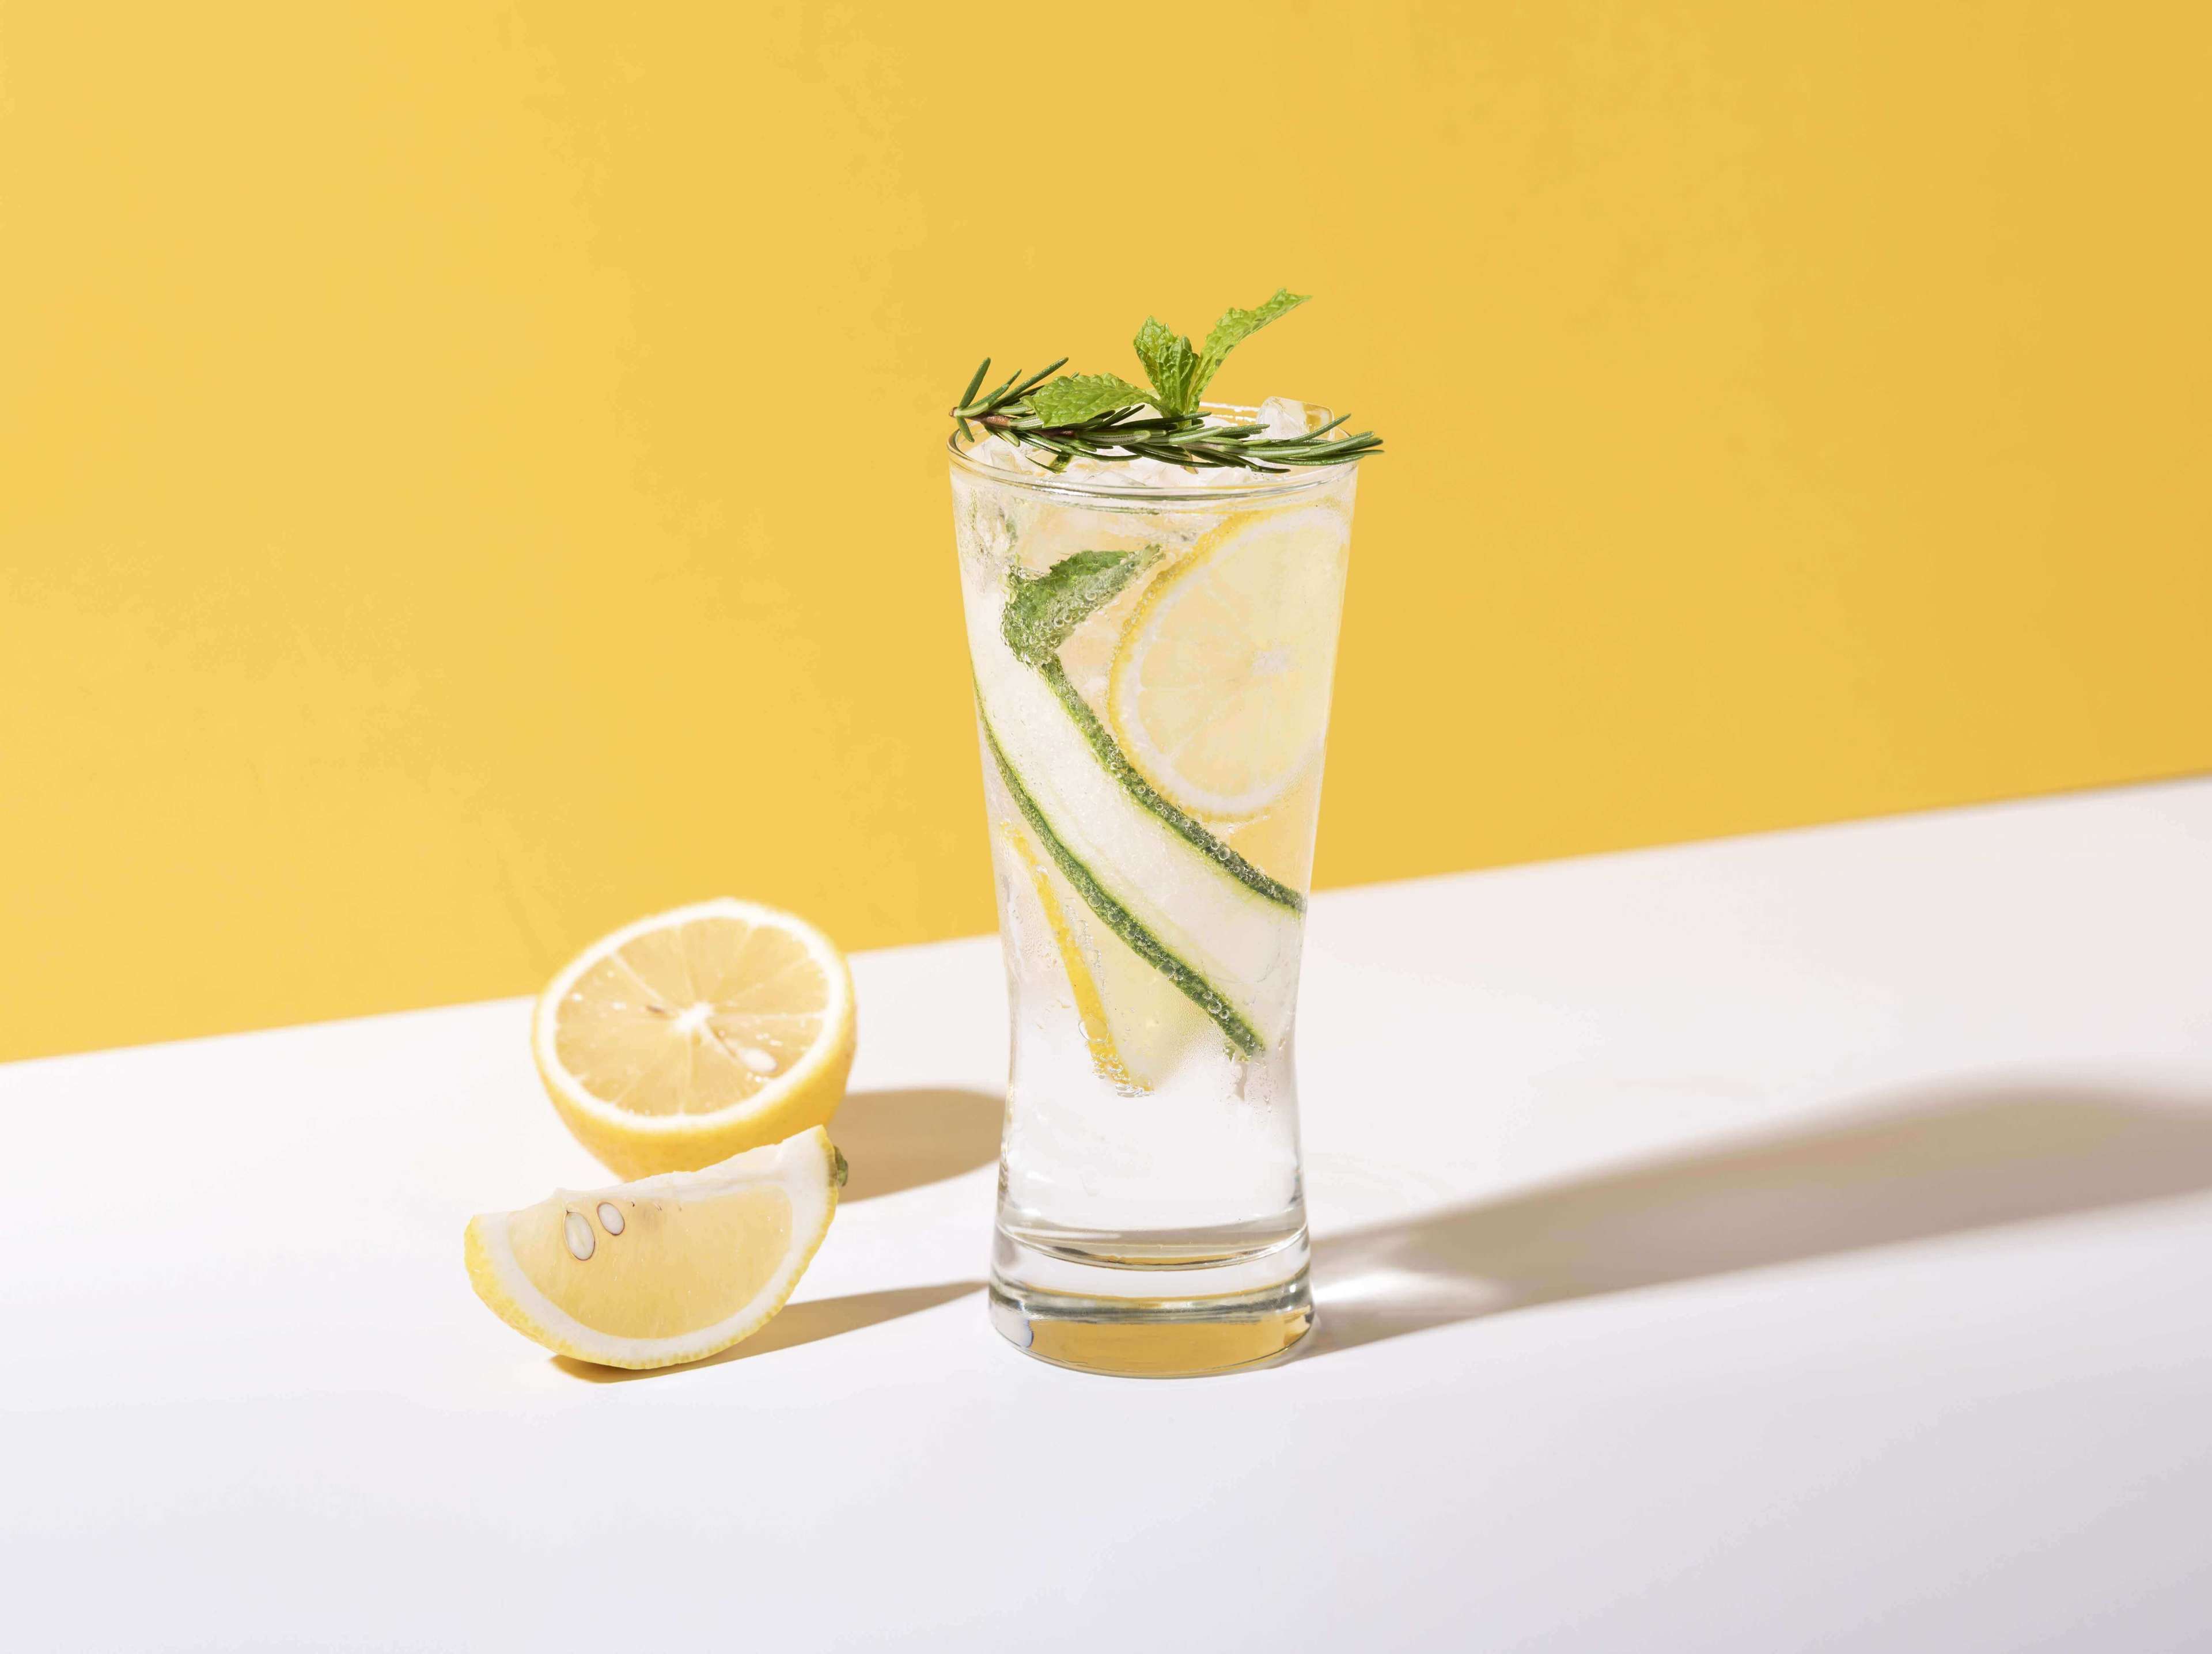 Mojito cocktail with lemon and mint in glass on yellow background